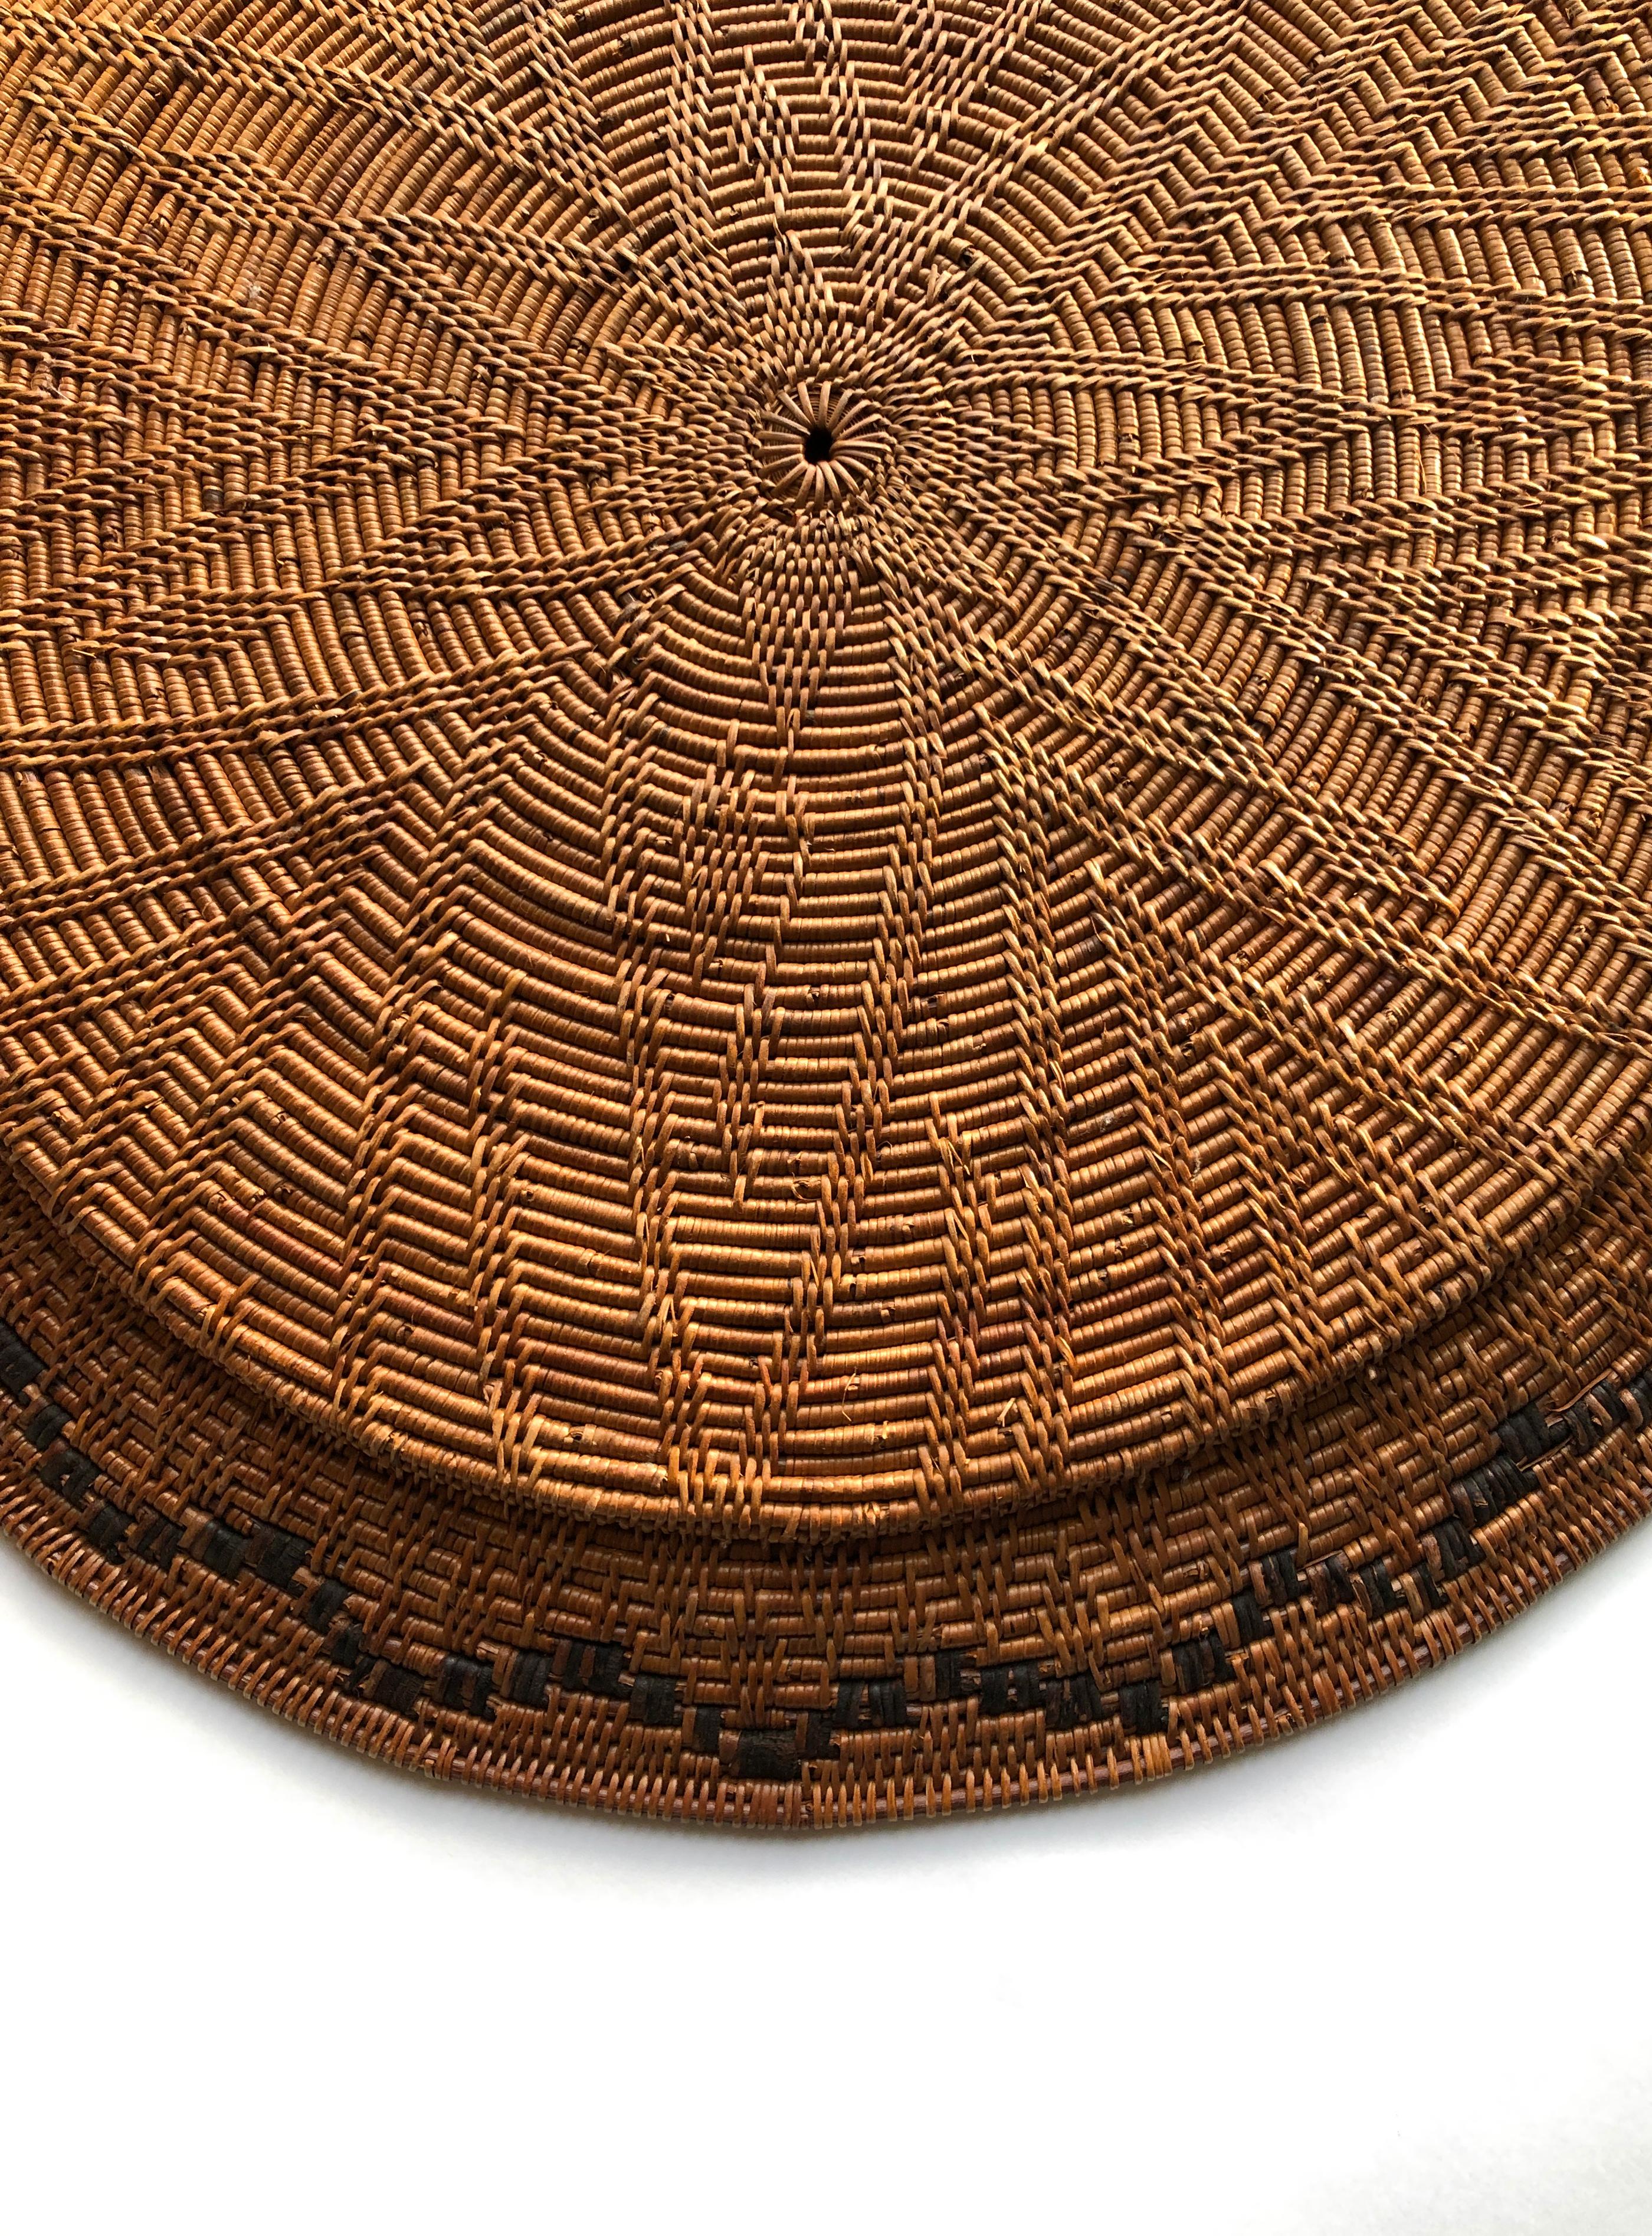 Swedish Folk Art Handcrafted Round Serving Tray In Good Condition For Sale In Stockholm, SE